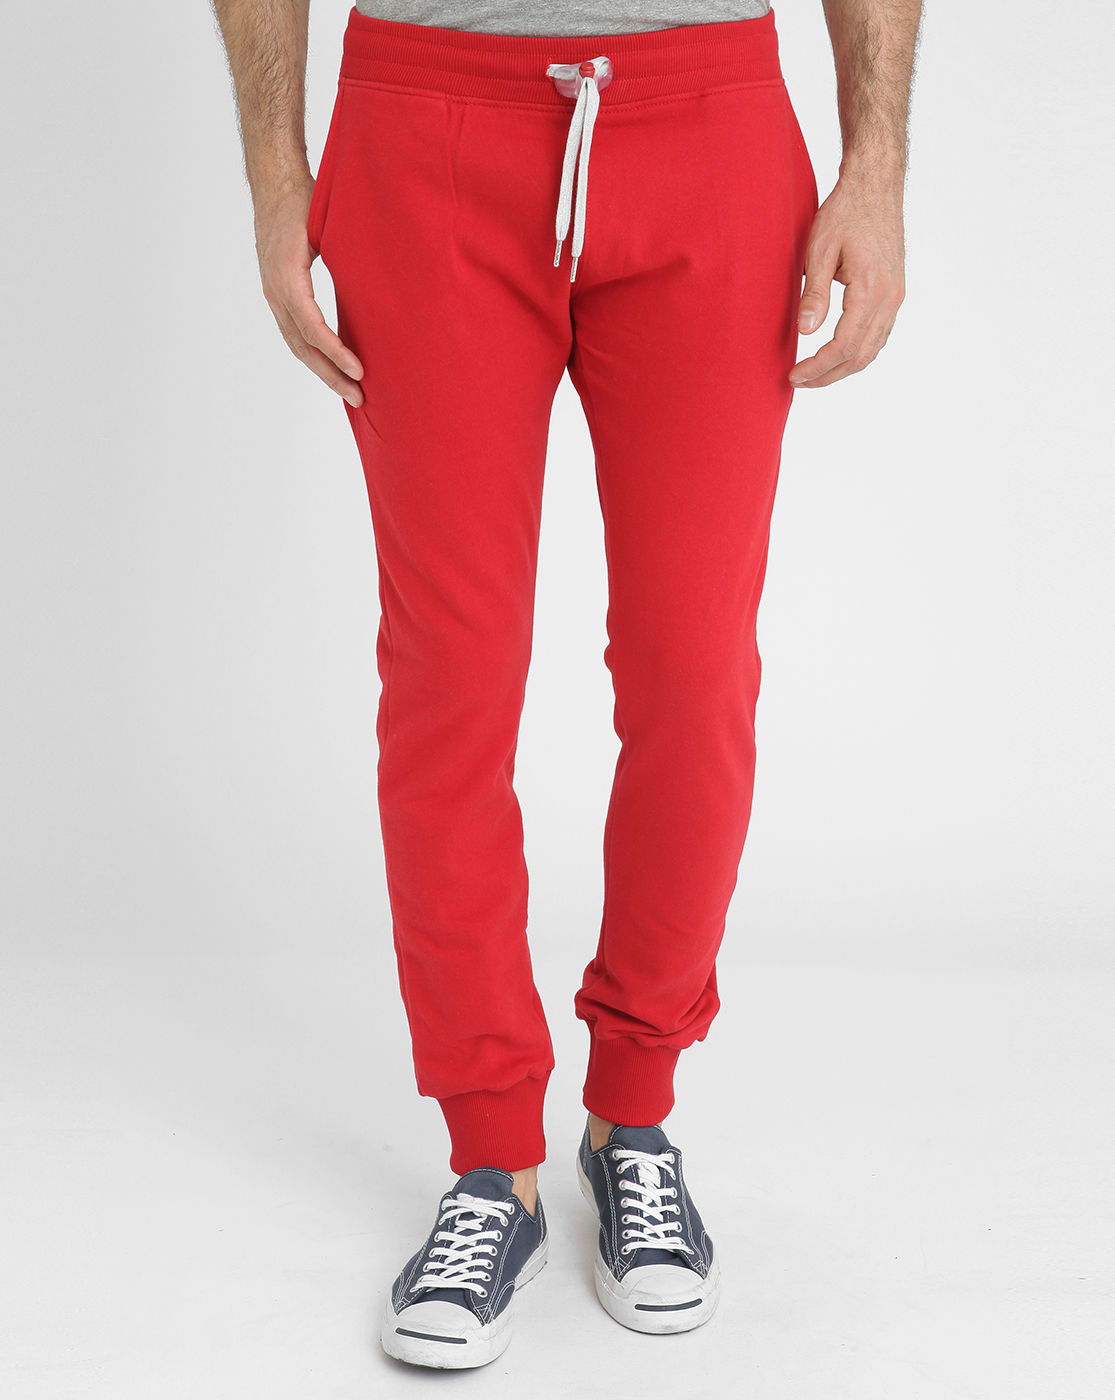 Sweet pants Red Slim-fit Joggers in Red for Men | Lyst